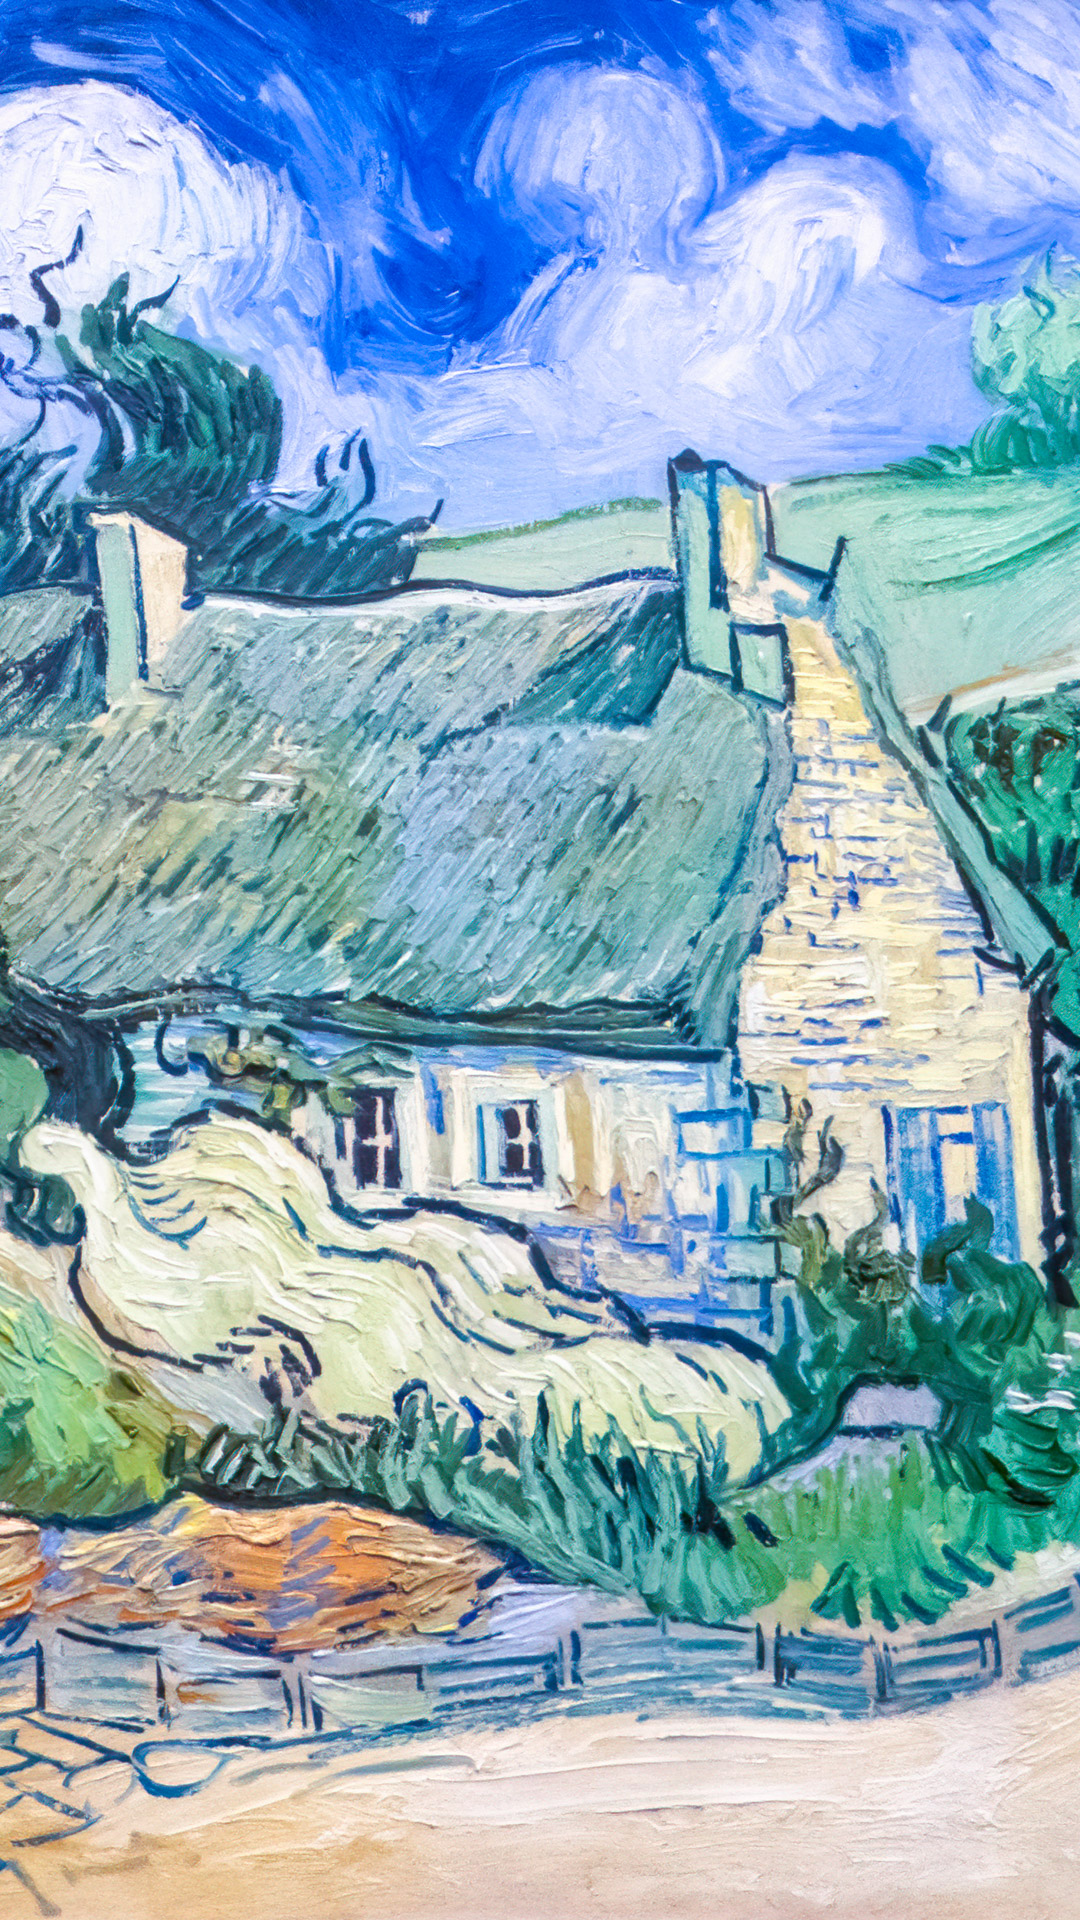 Escape to the rustic charm of Thatched Cottages at Cordeville, where 1080p vincent van Gogh wallpaper transforms your devices into windows to idyllic landscapes.